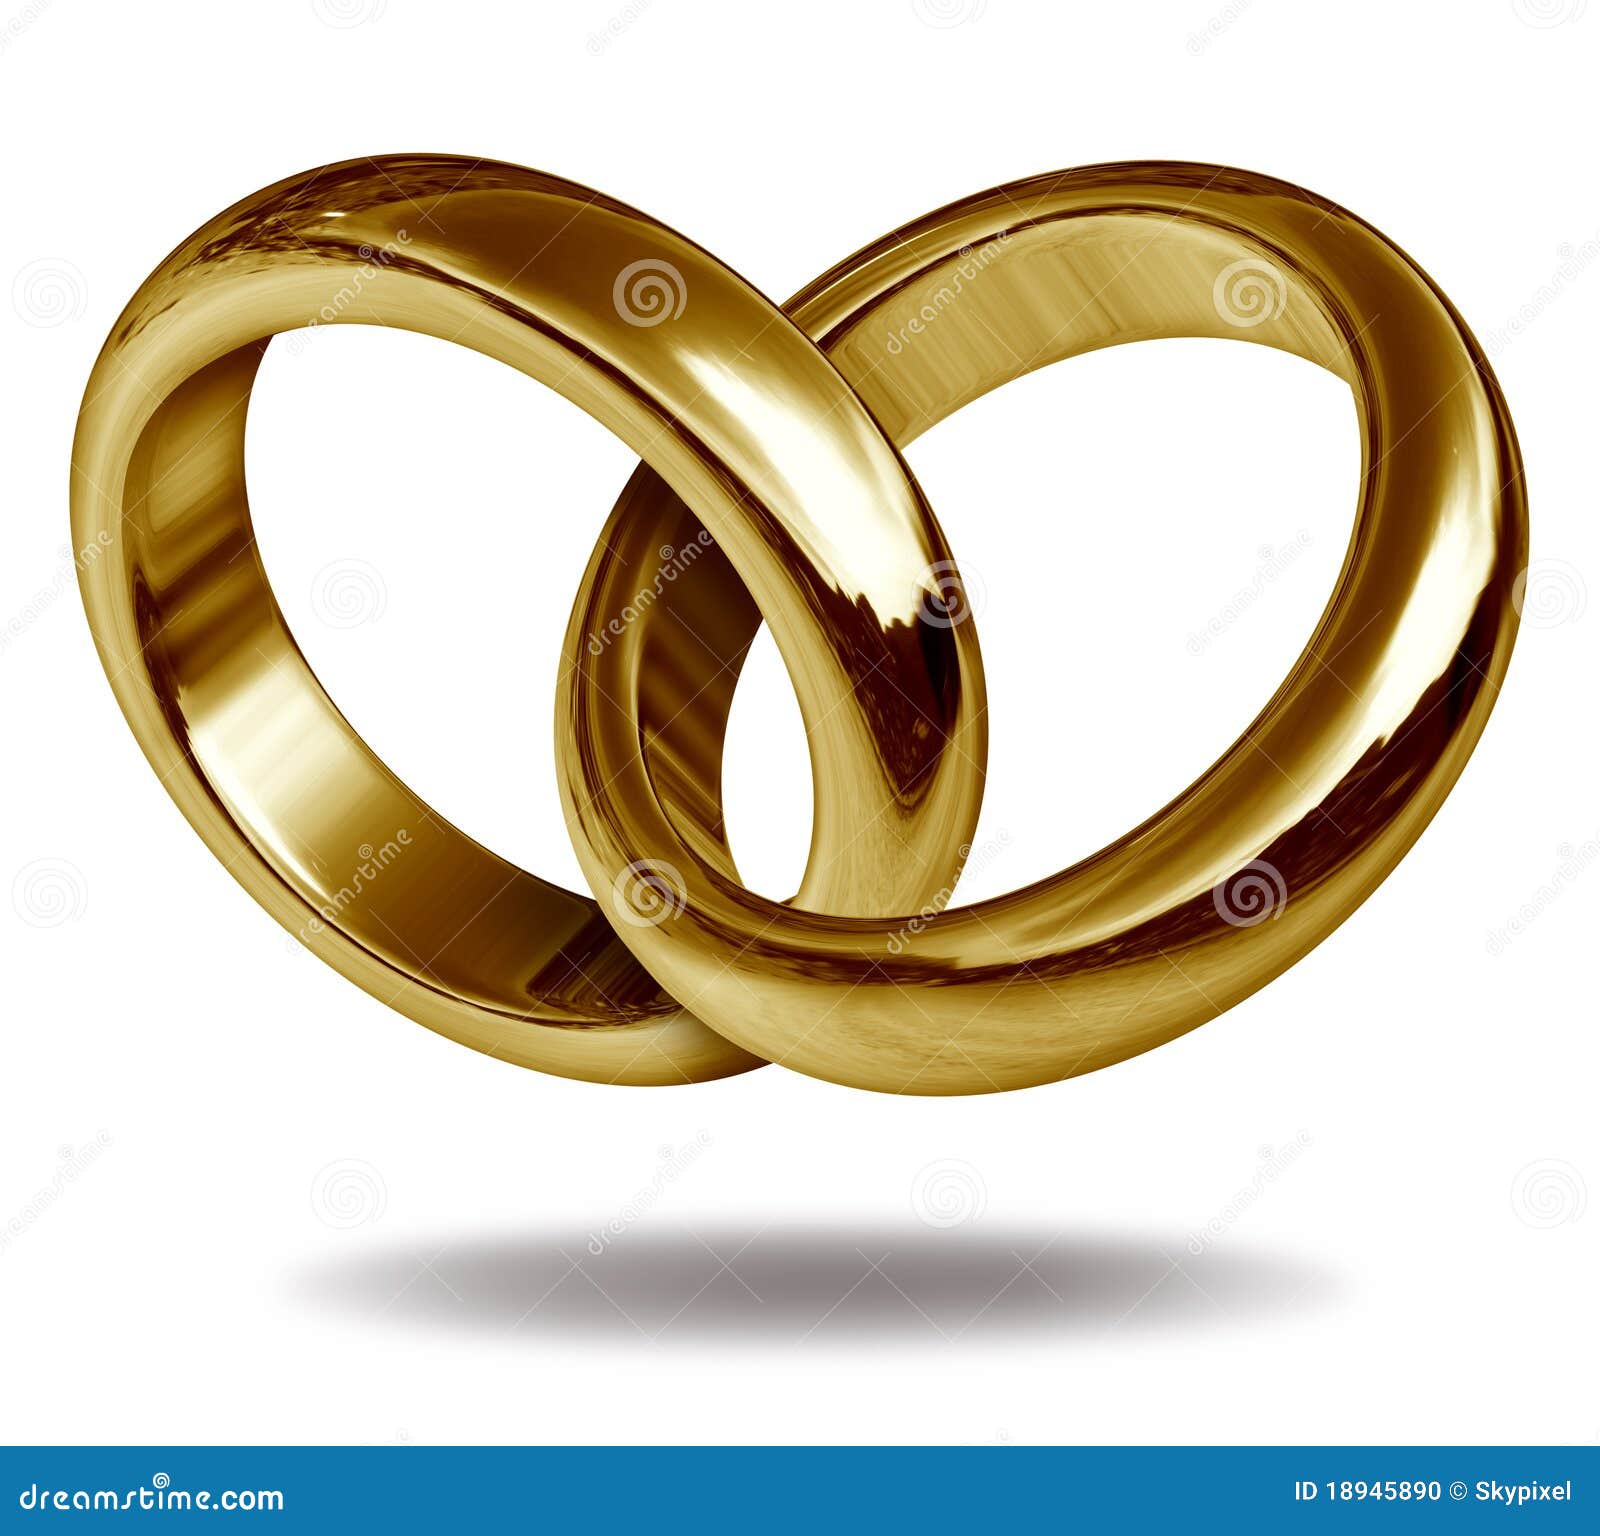 linked wedding rings clipart - photo #39